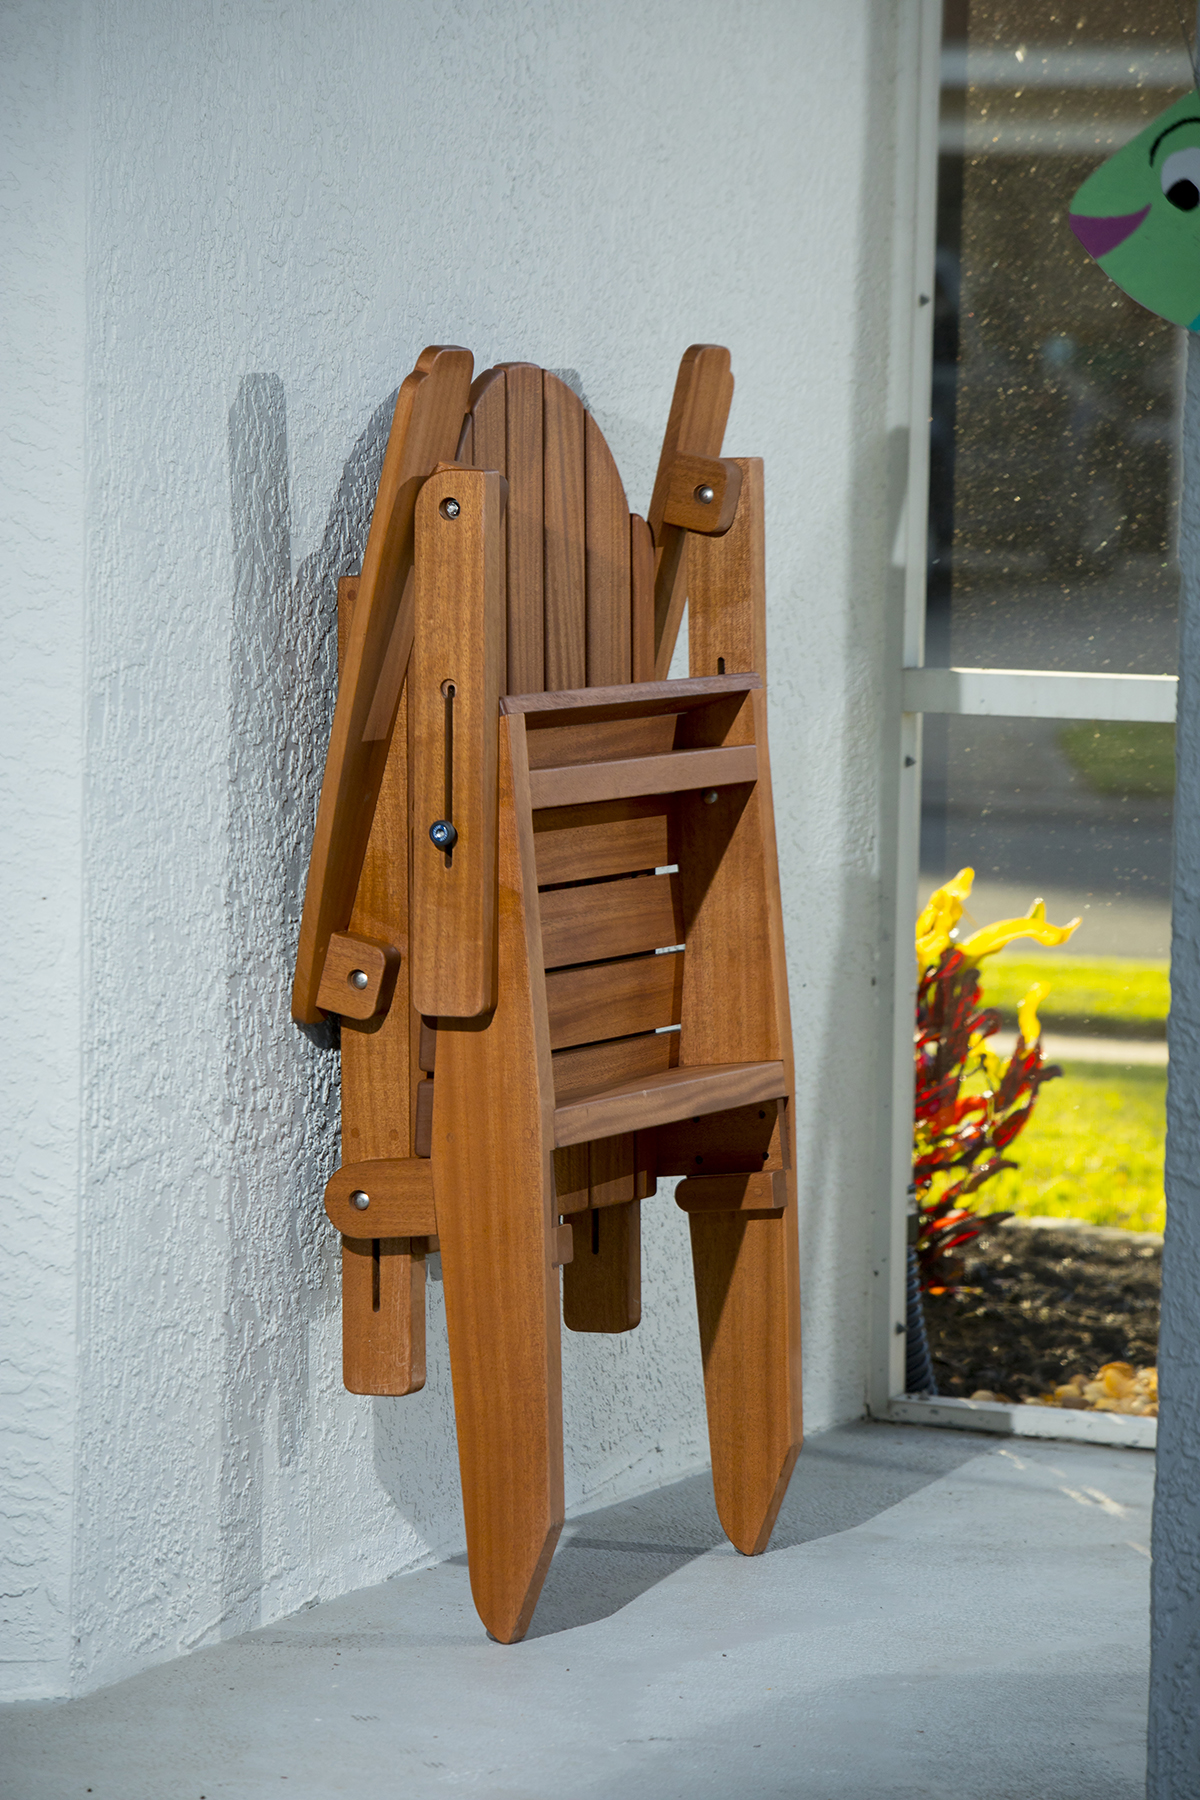 The folding Adirondack chair is designed especially for those who have limited space.